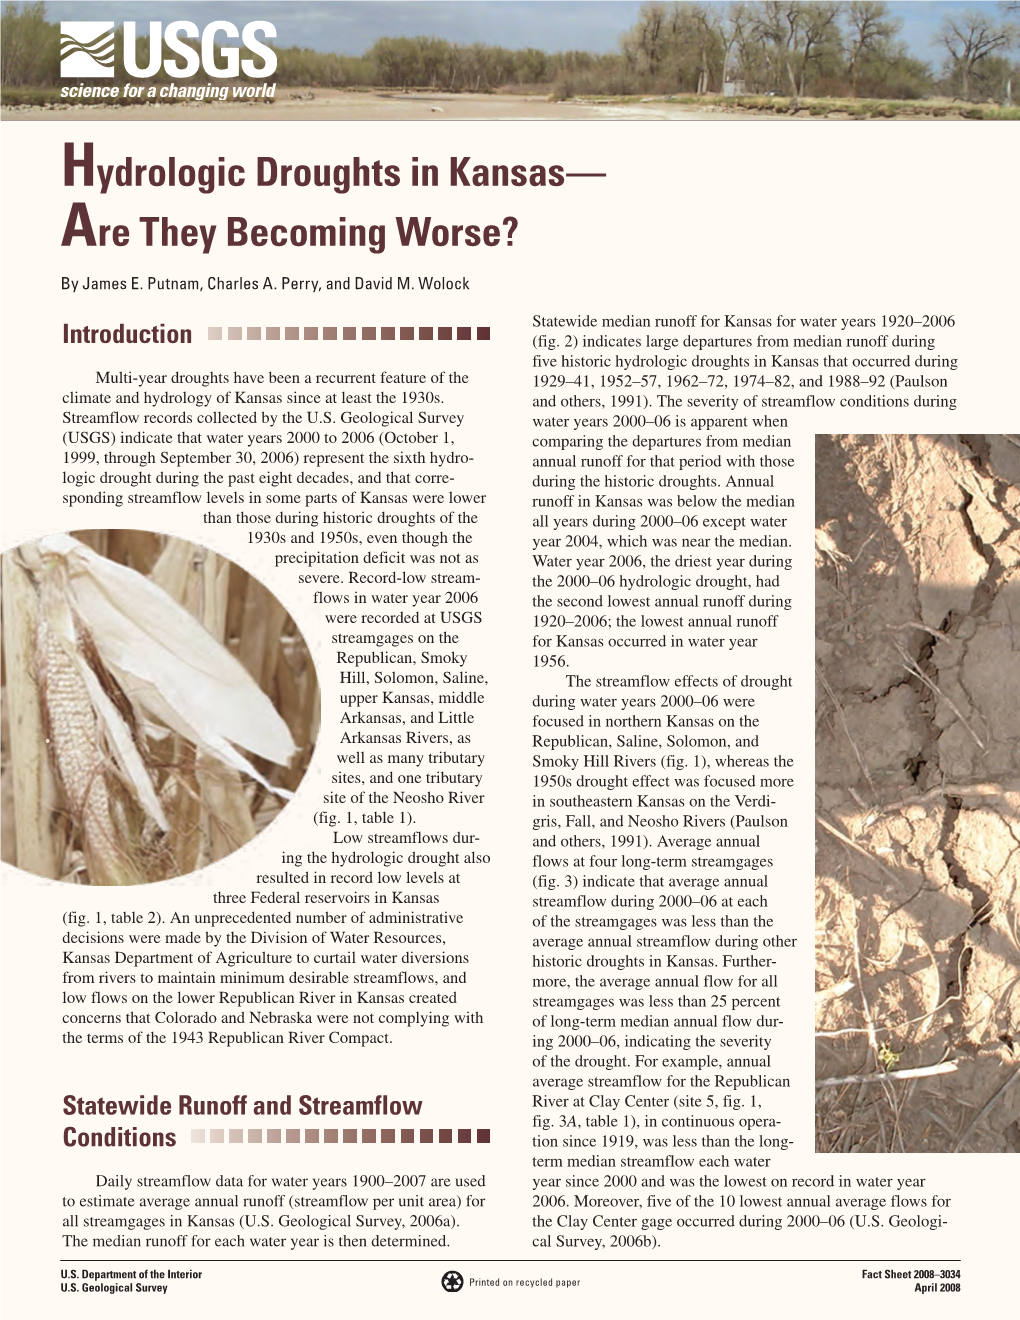 Hydrologic Droughts in Kansas--Are They Becoming Worse?